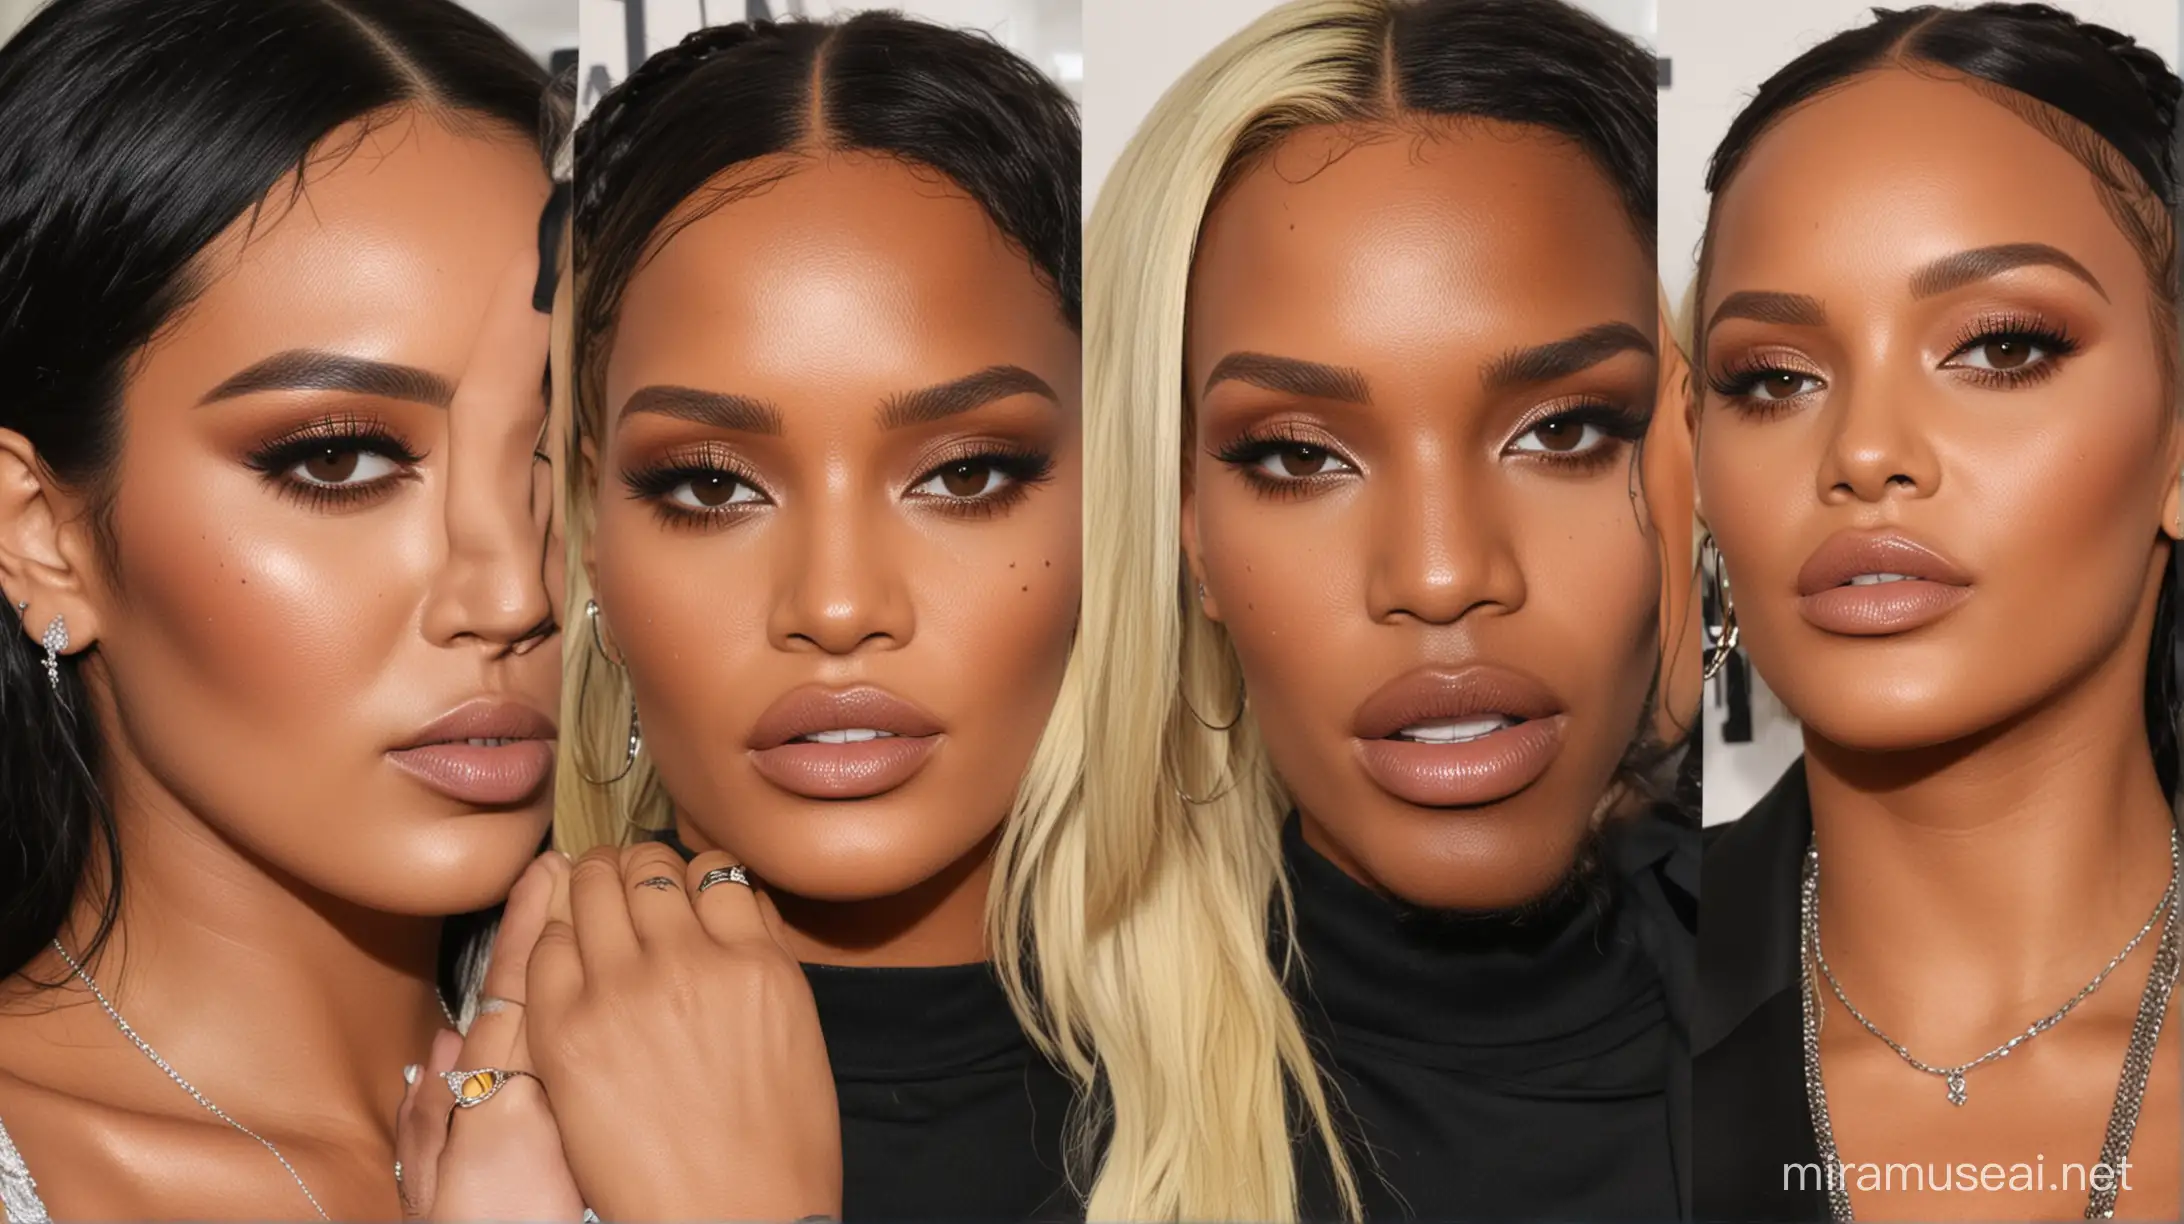 generate a youtube thumbnail for this story: Kim K GONE MAD After Rihanna ALLEGES That Kim is Trying To Hook Up With A$AP Rocky